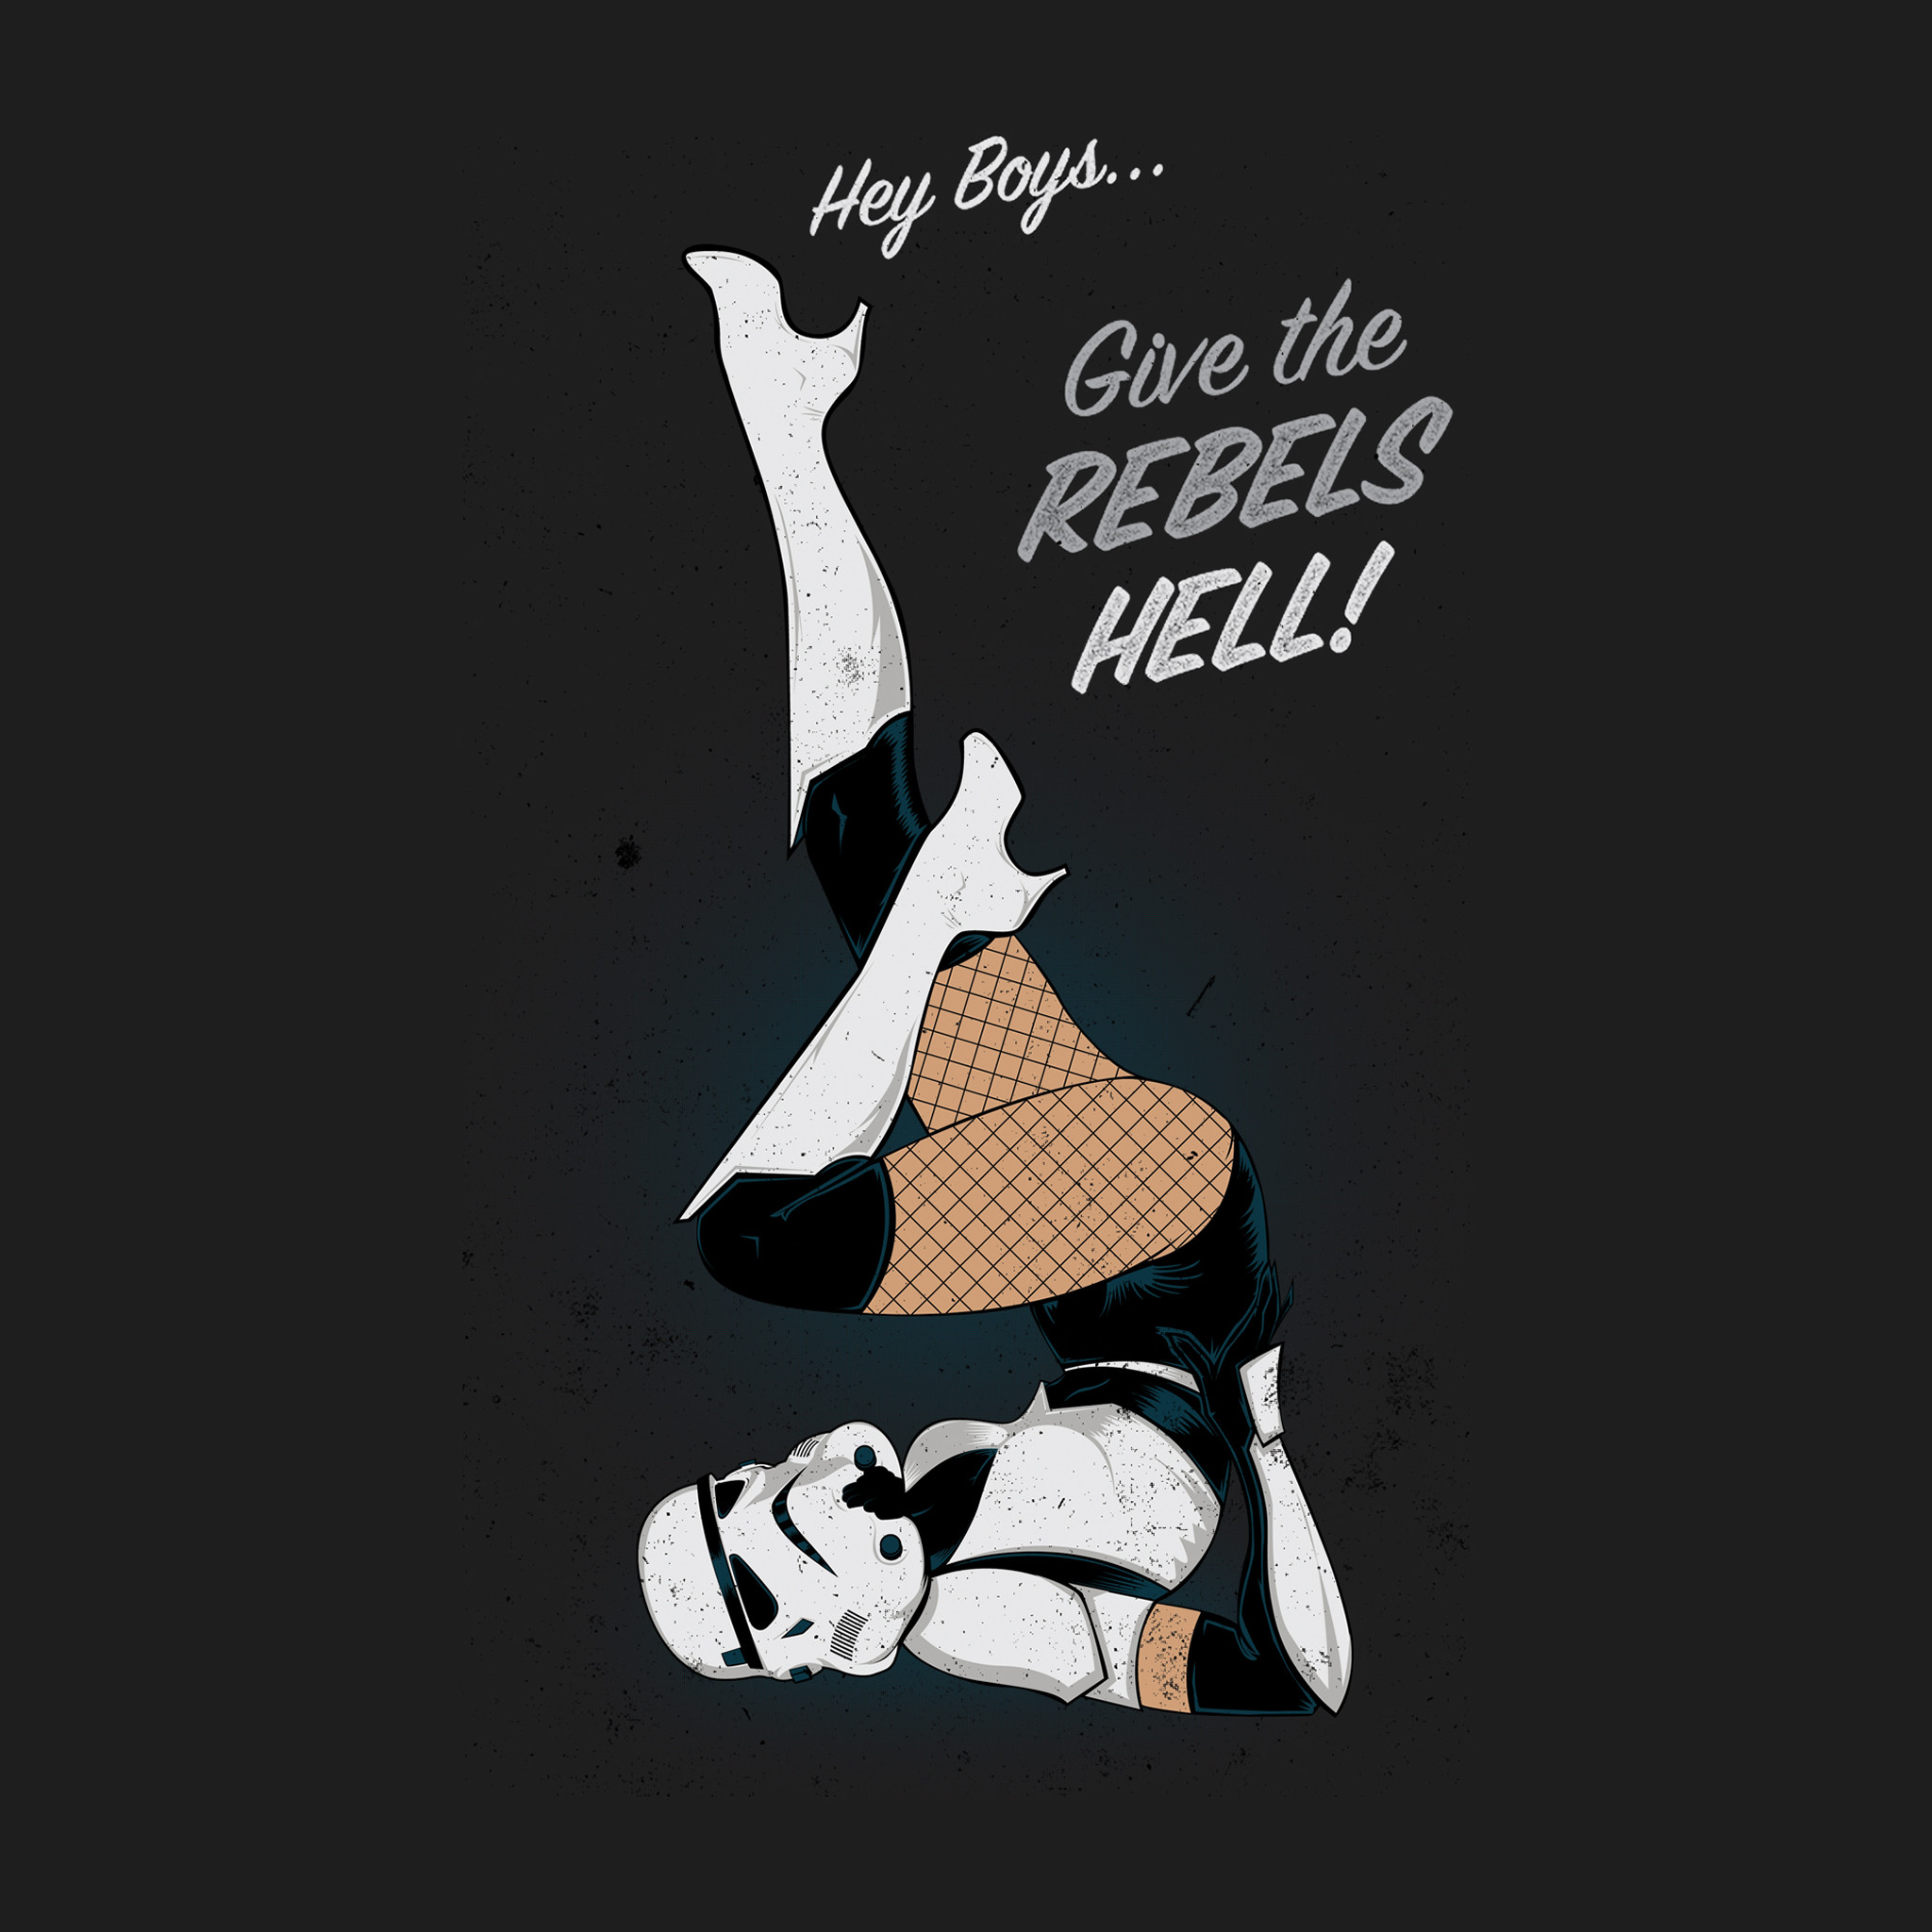 2048x2048 Stormtrooper Pin Up Girl Style iPad Air Wallpaper Download | iPhone .